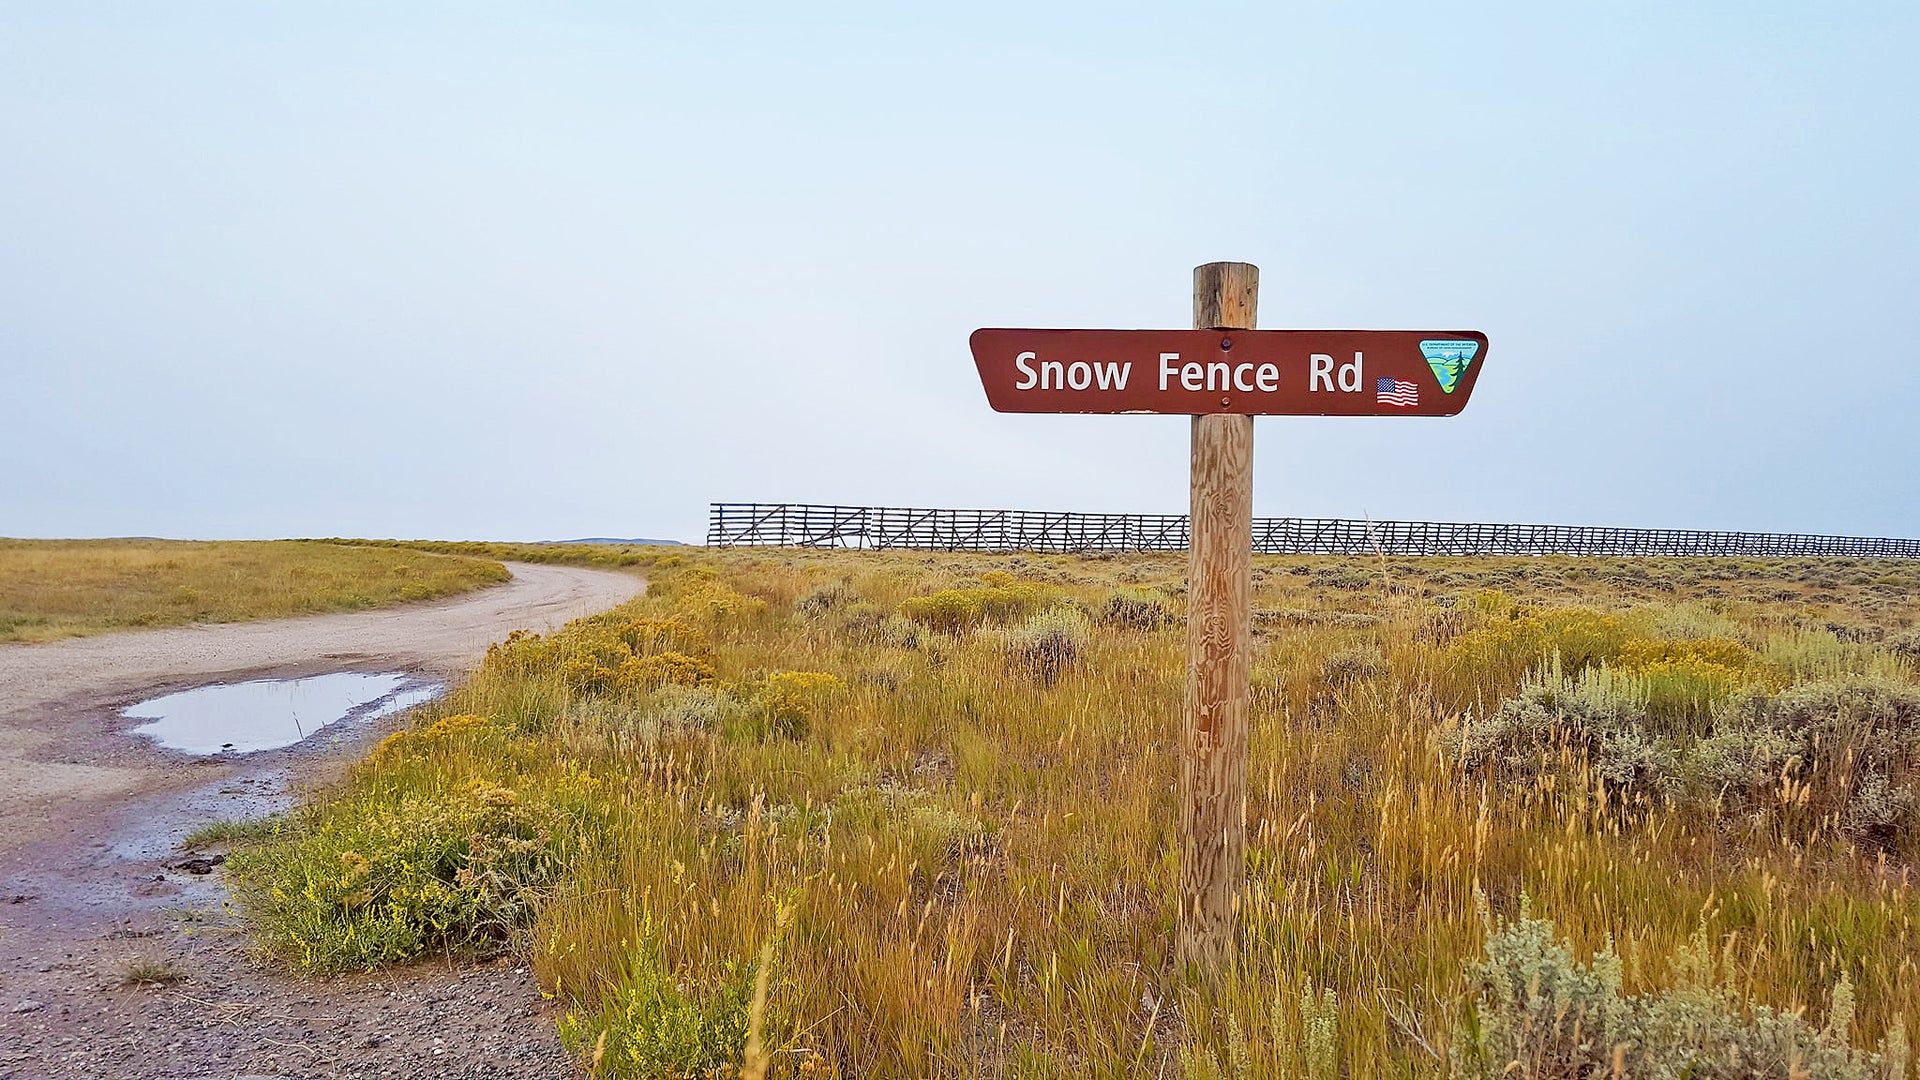 Snow Fence Road, Wyoming